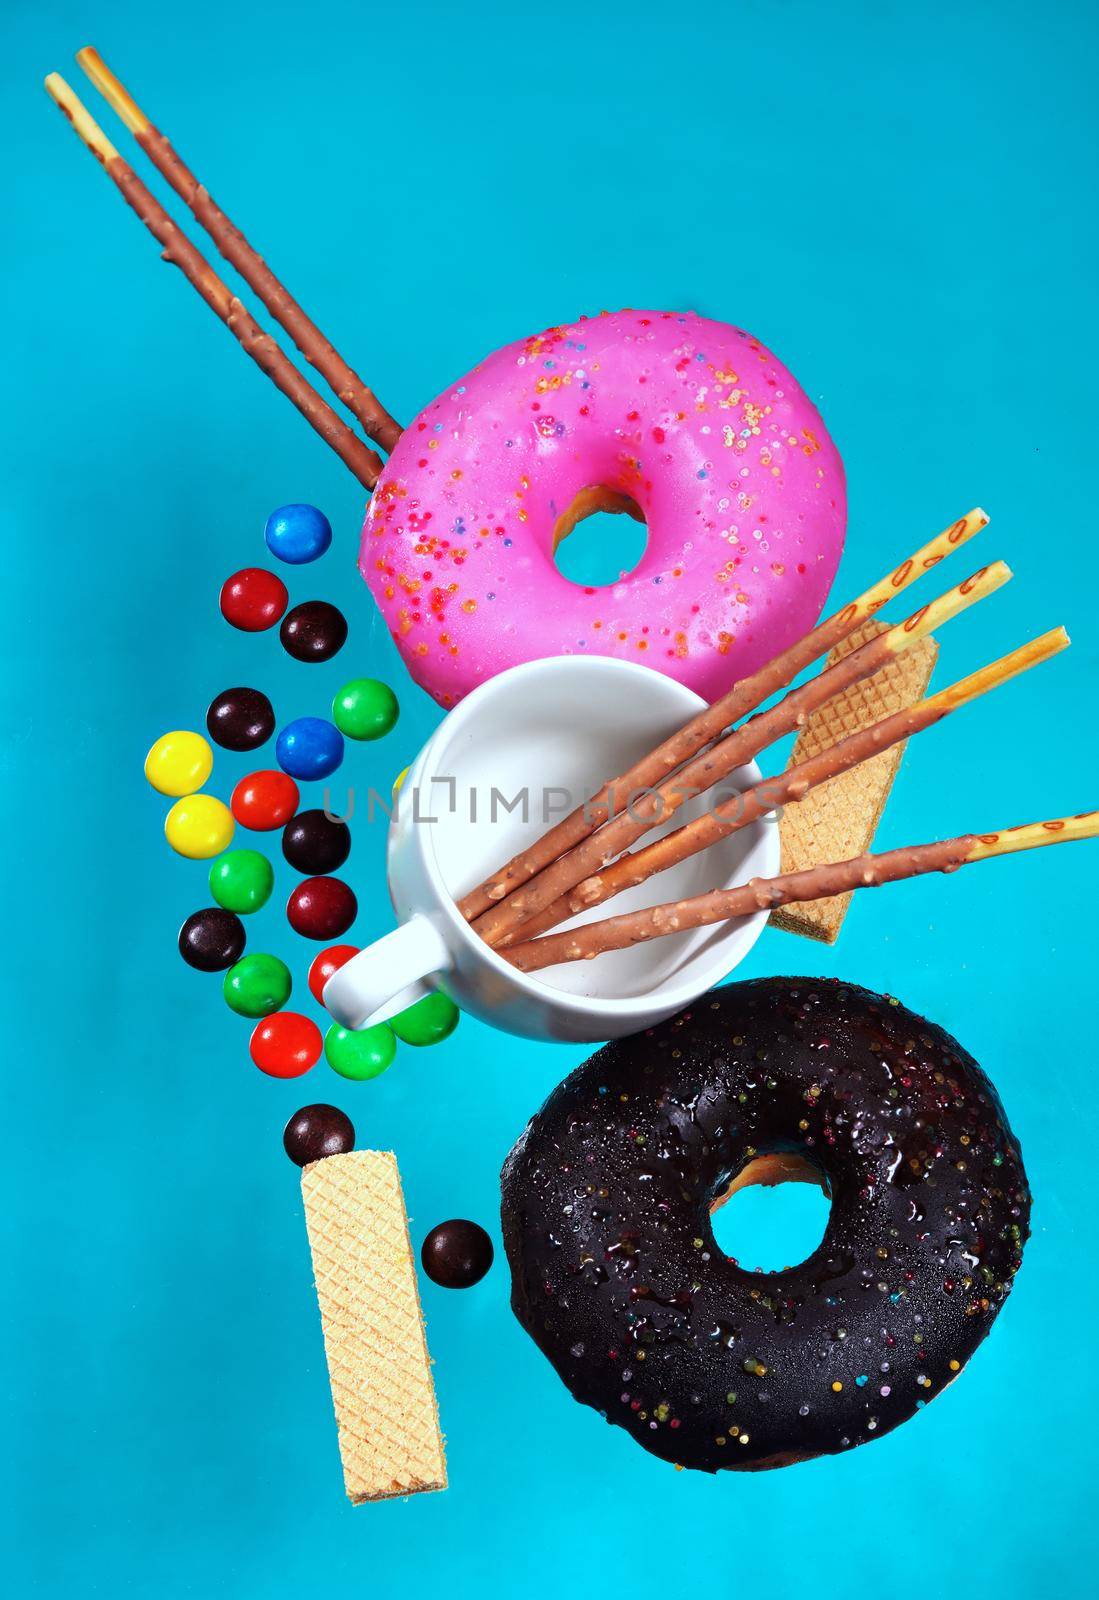 Donuts and pastries colorful background blue pastel dessert and snack concept